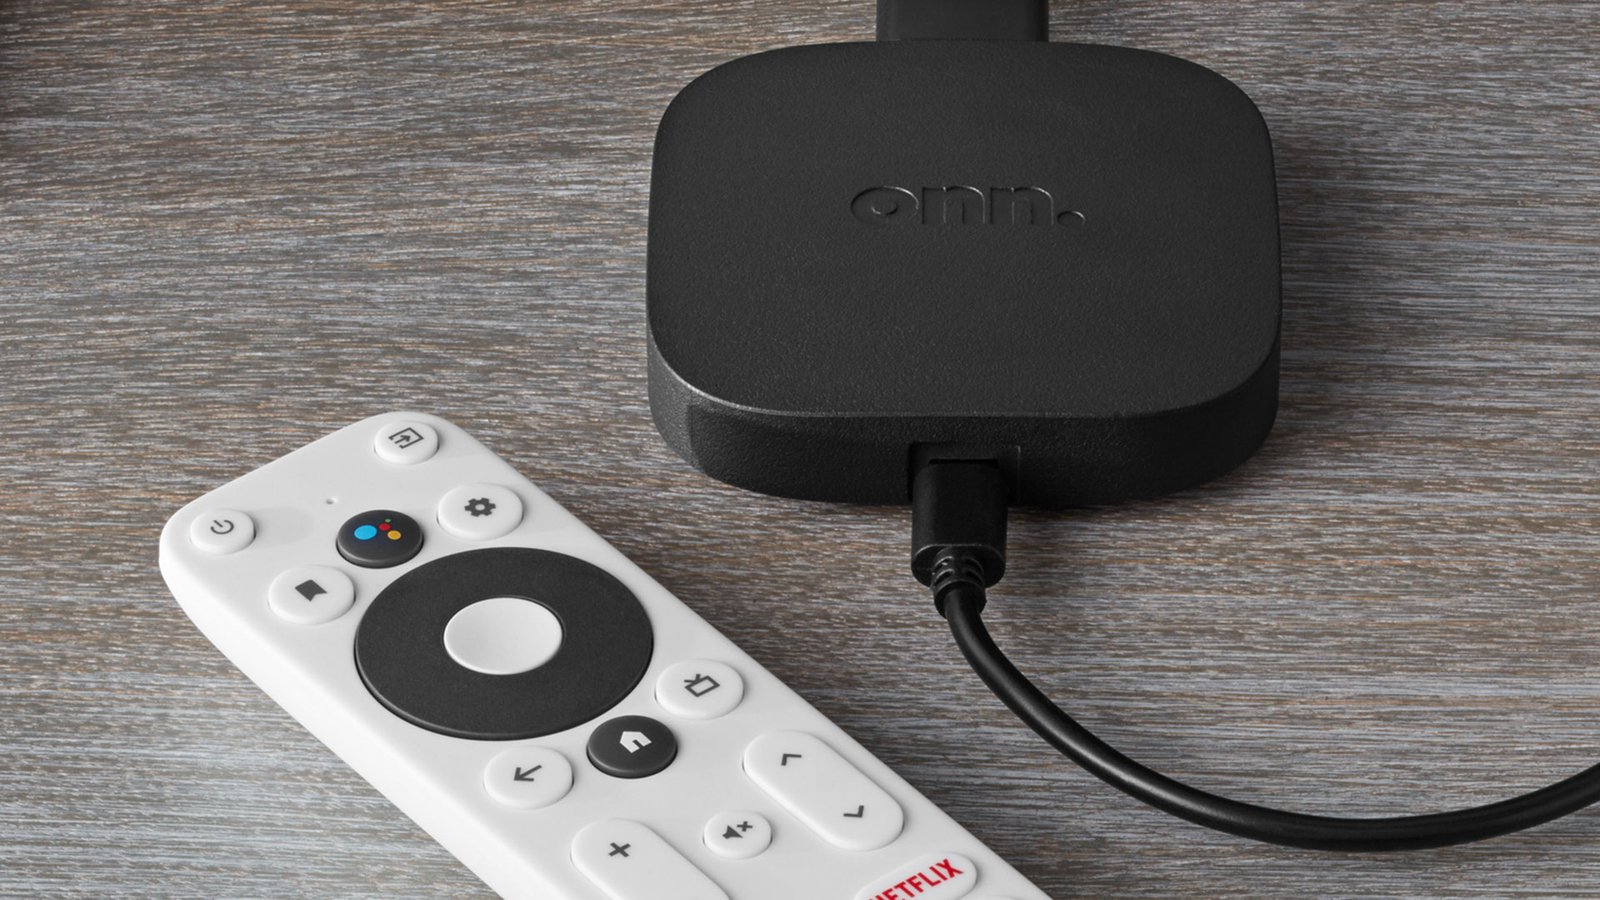 Chromecast killer? Walmart’s leaked 4K box could be the ultimate streaming device